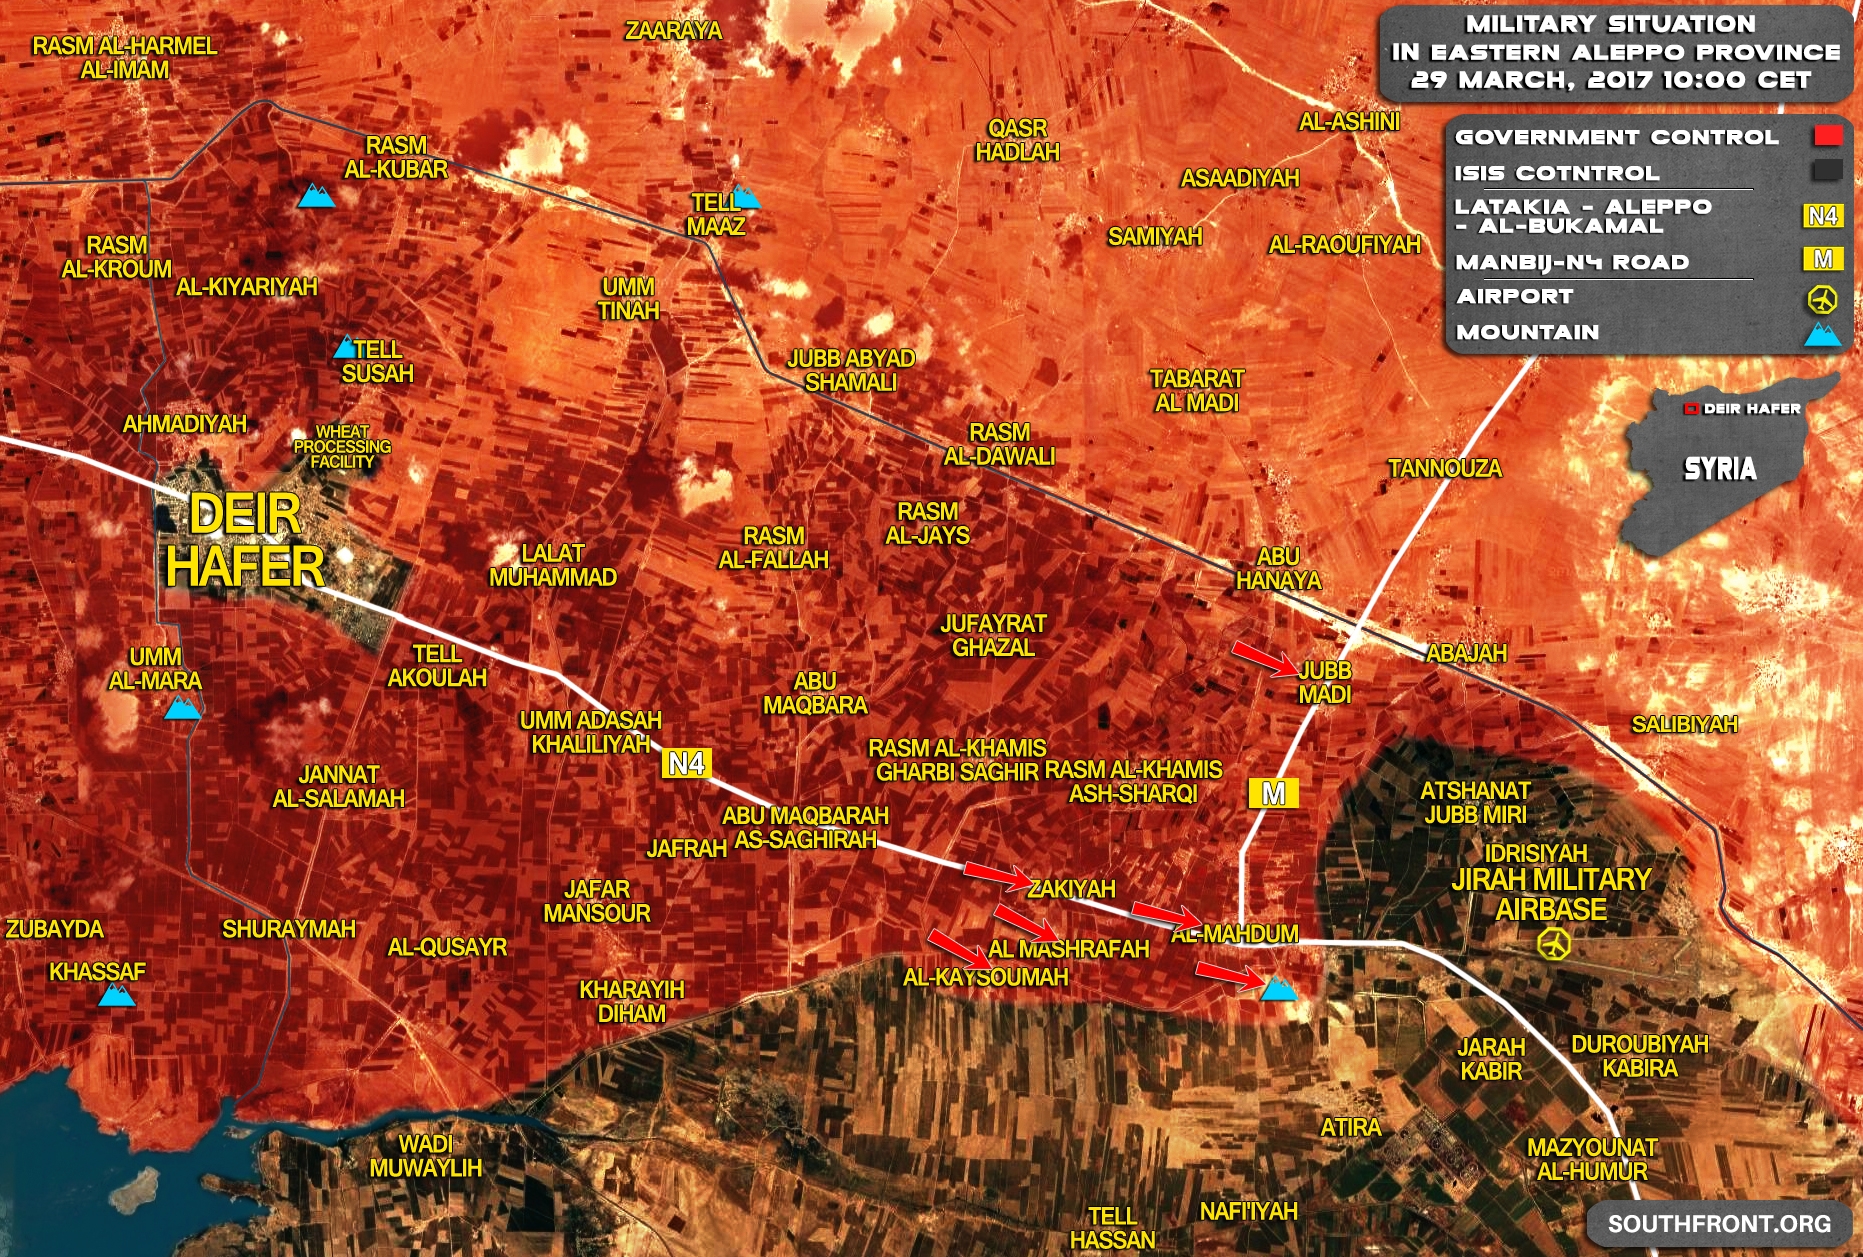 ISIS-Held Jirah Military Air Base In Aleppo To Be Encircled By Syrian Army (Map)